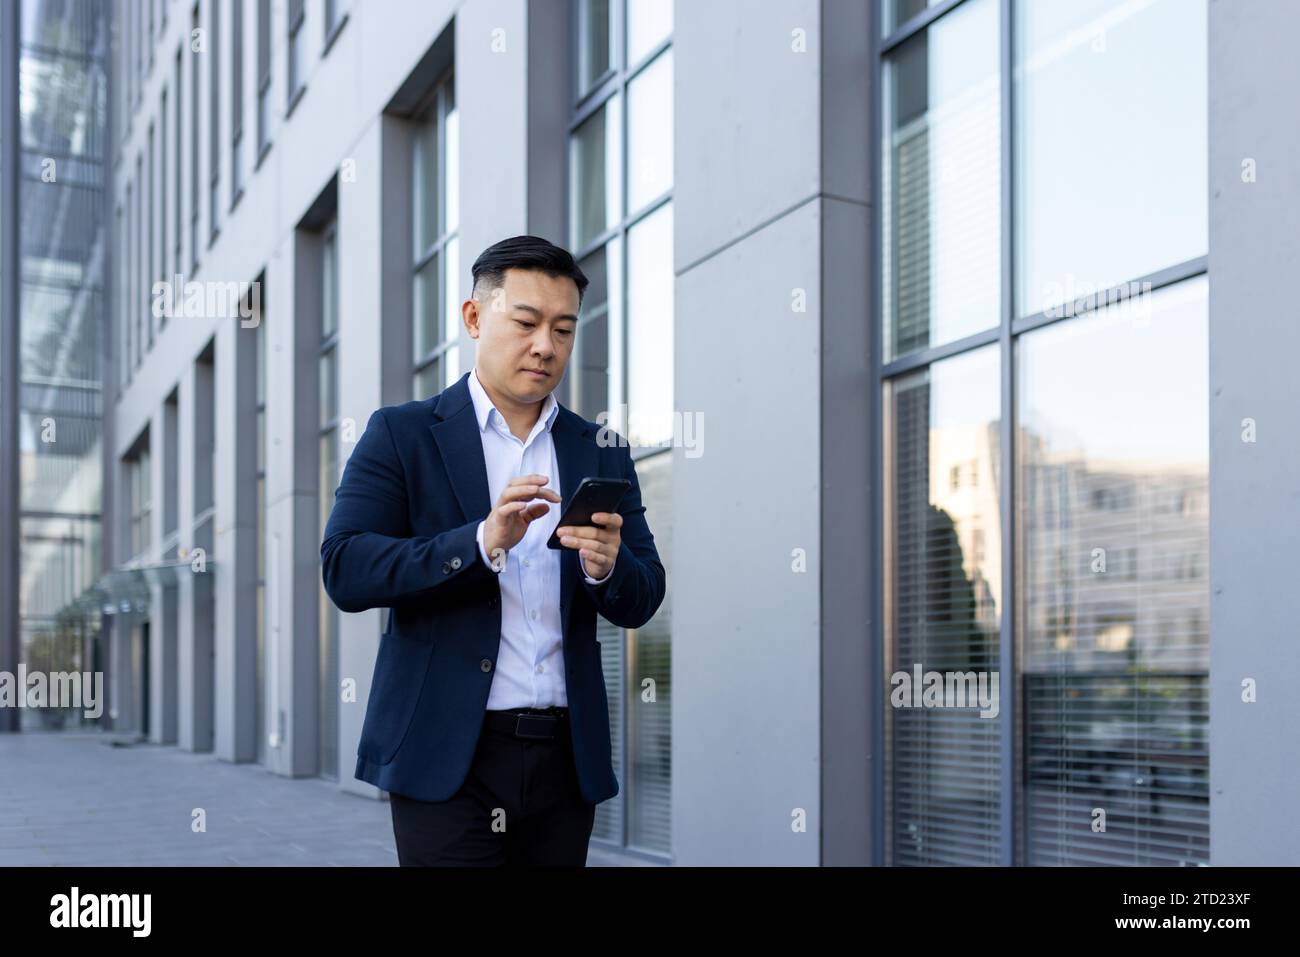 A young Asian man in a business suit is walking down the street near office buildings and using a mobile phone. Stock Photo